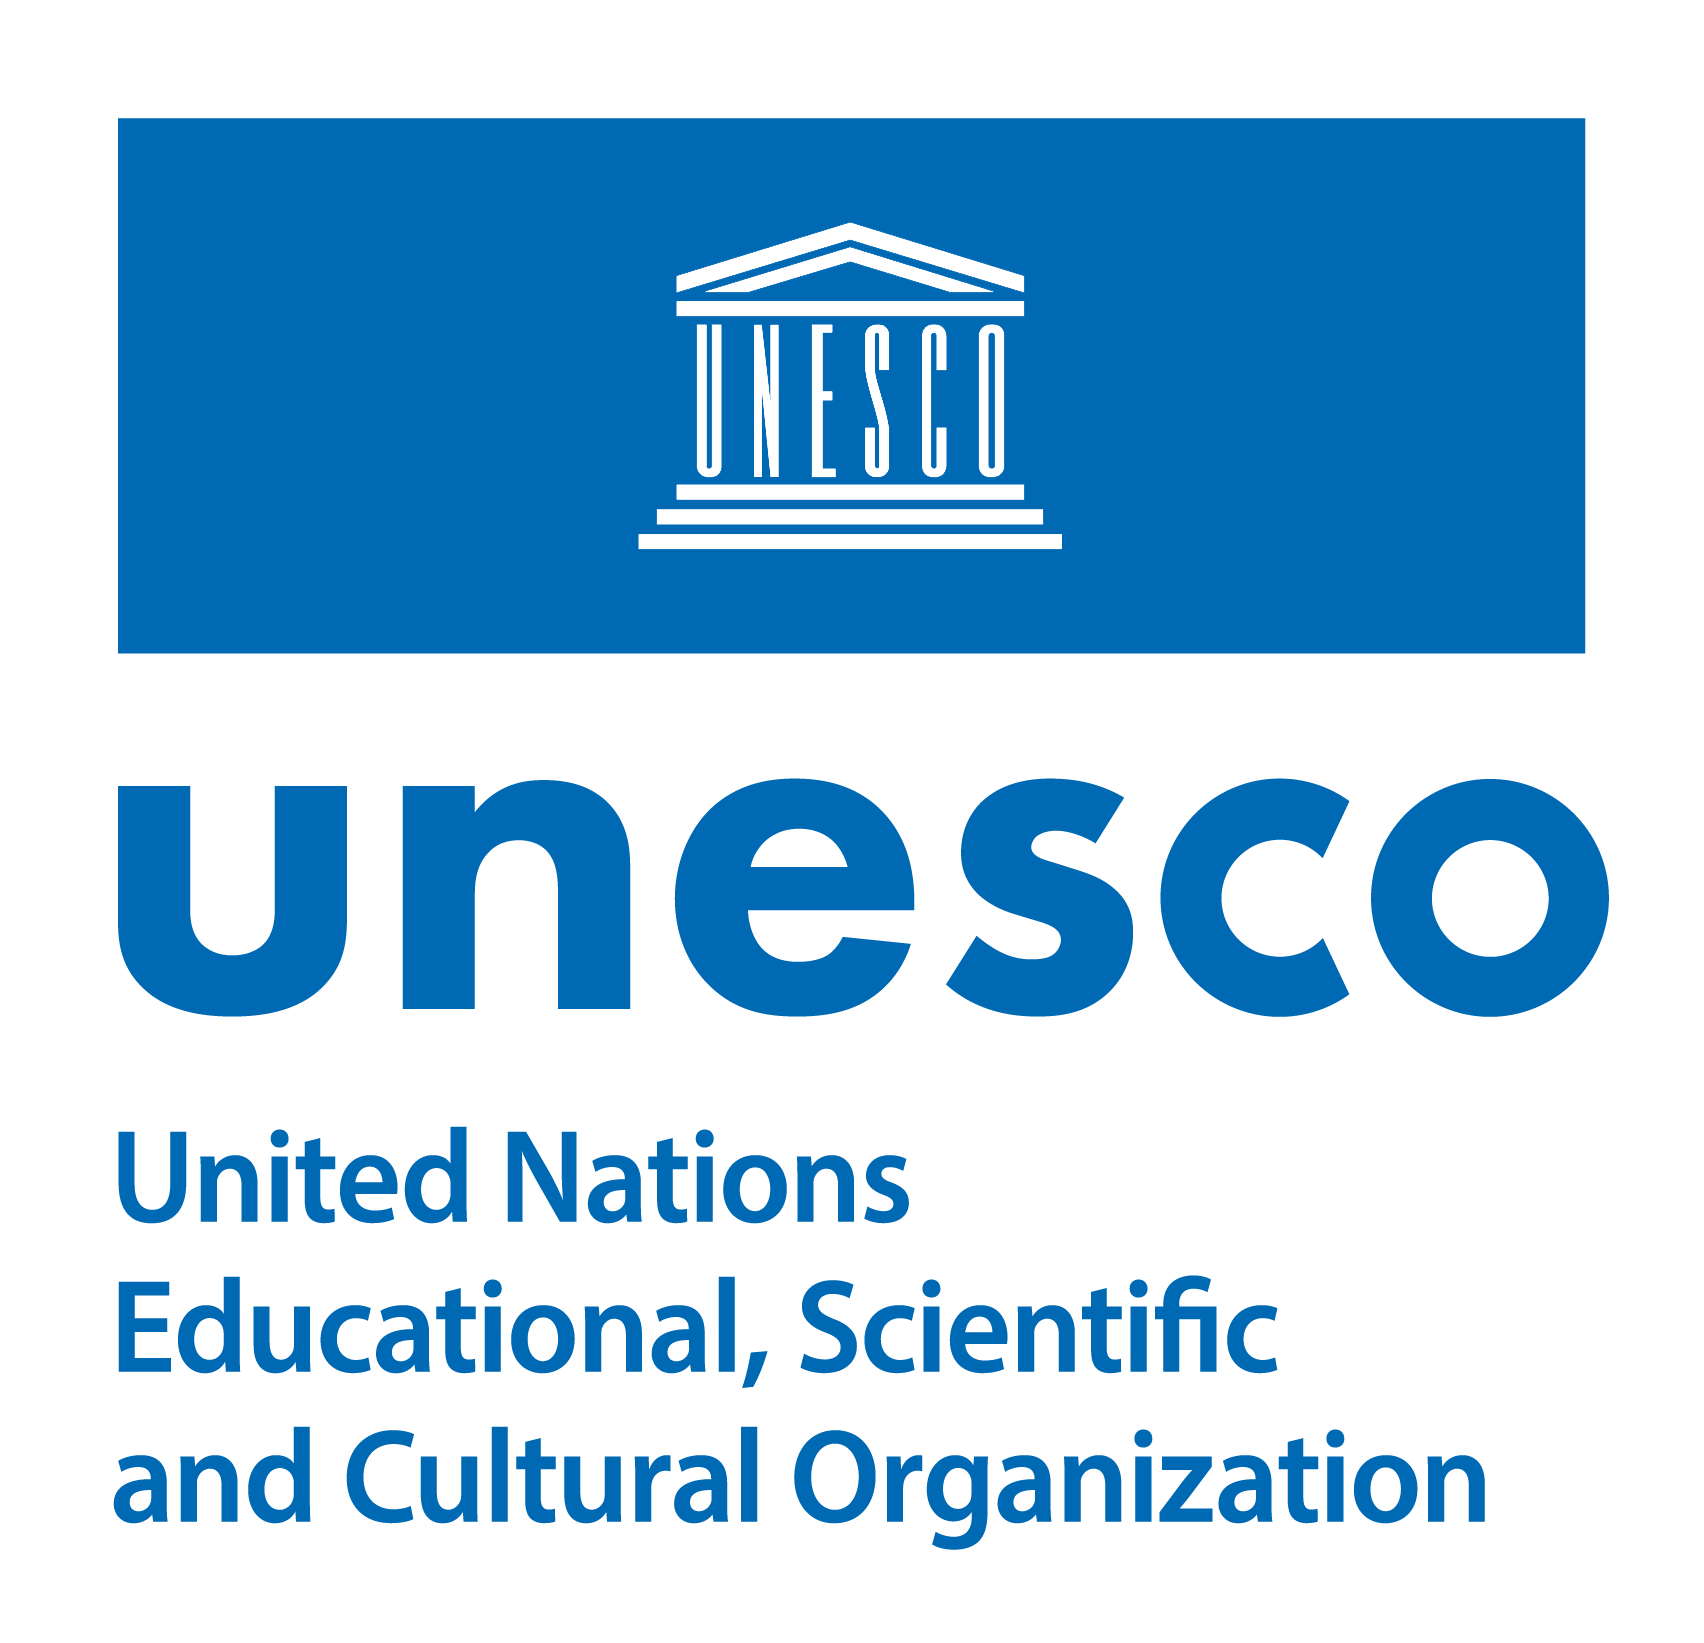 The United Nations Educational, Scientific and Cultural Organization